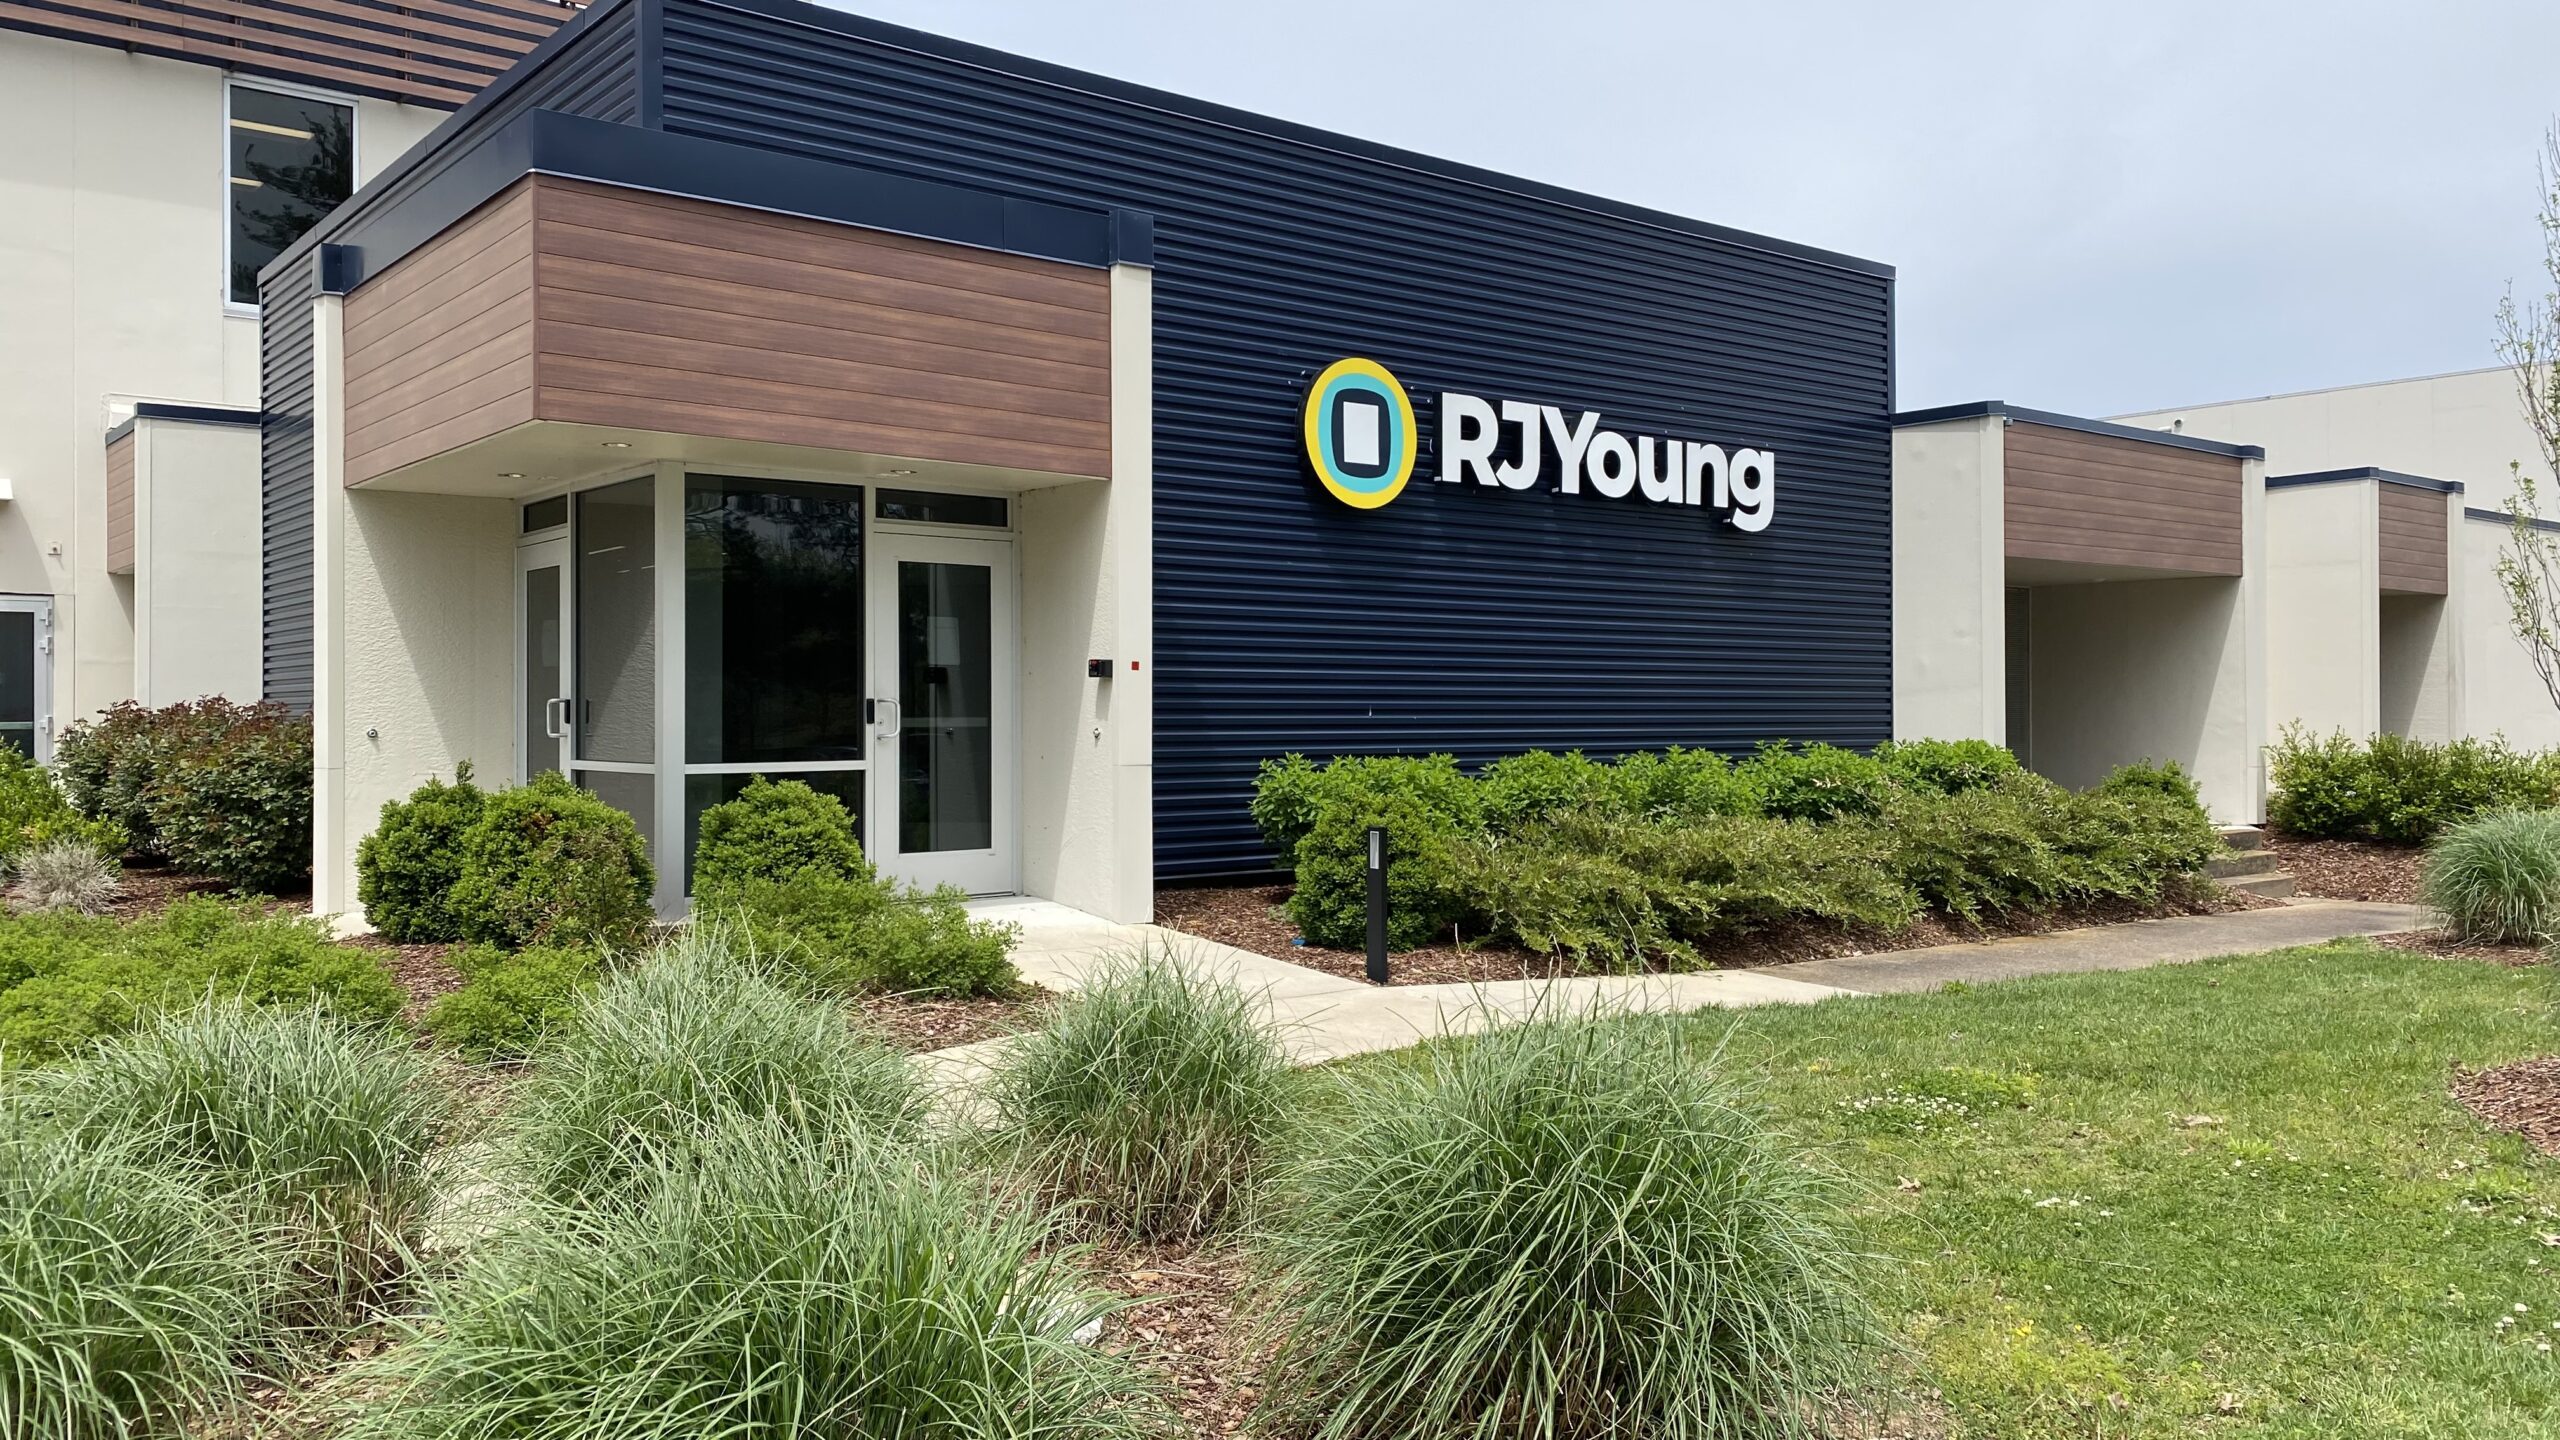 RJ Young’s AJ Baggott On Finding IT and Cybersecurity Talent, Production Print, and New Initiatives